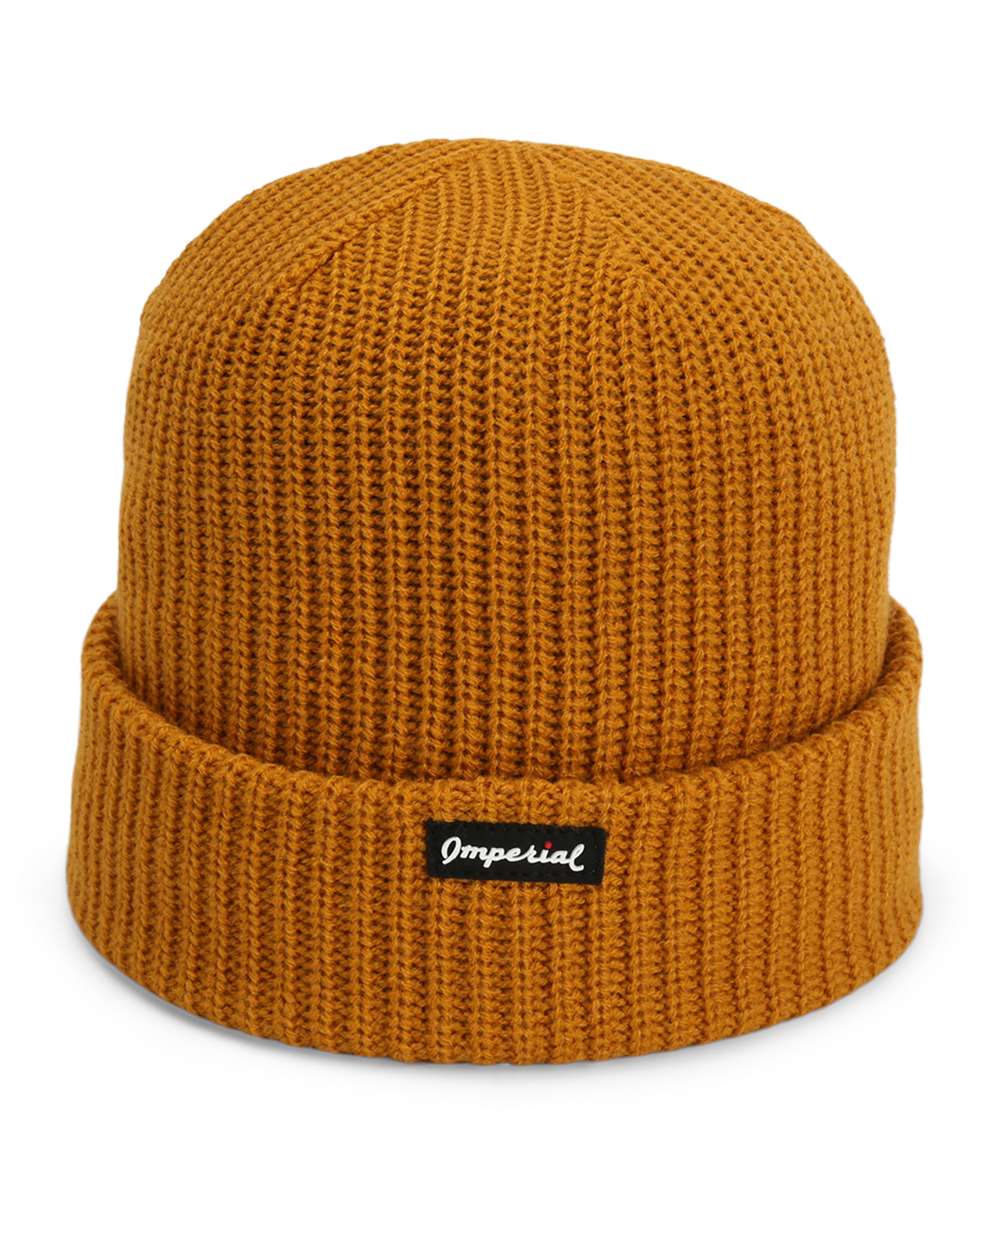 Imperial 6020 - The Mogul Knit Hat